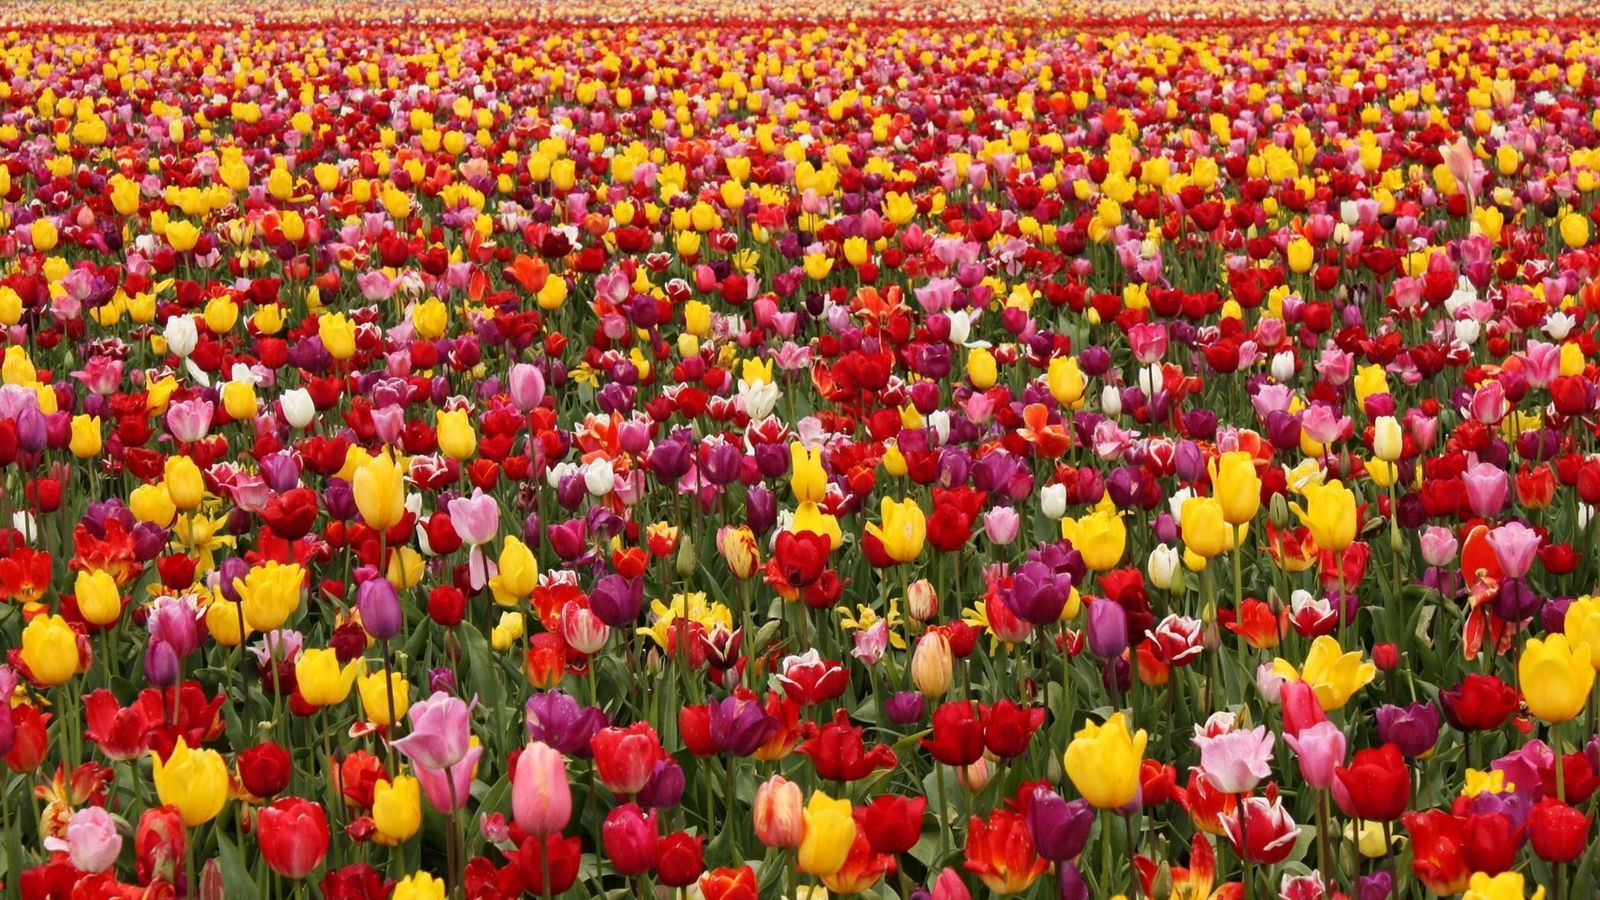 Download wallpaper 1600x900 tulips, flowers, field, different, lots, spring widescreen 16:9 HD background